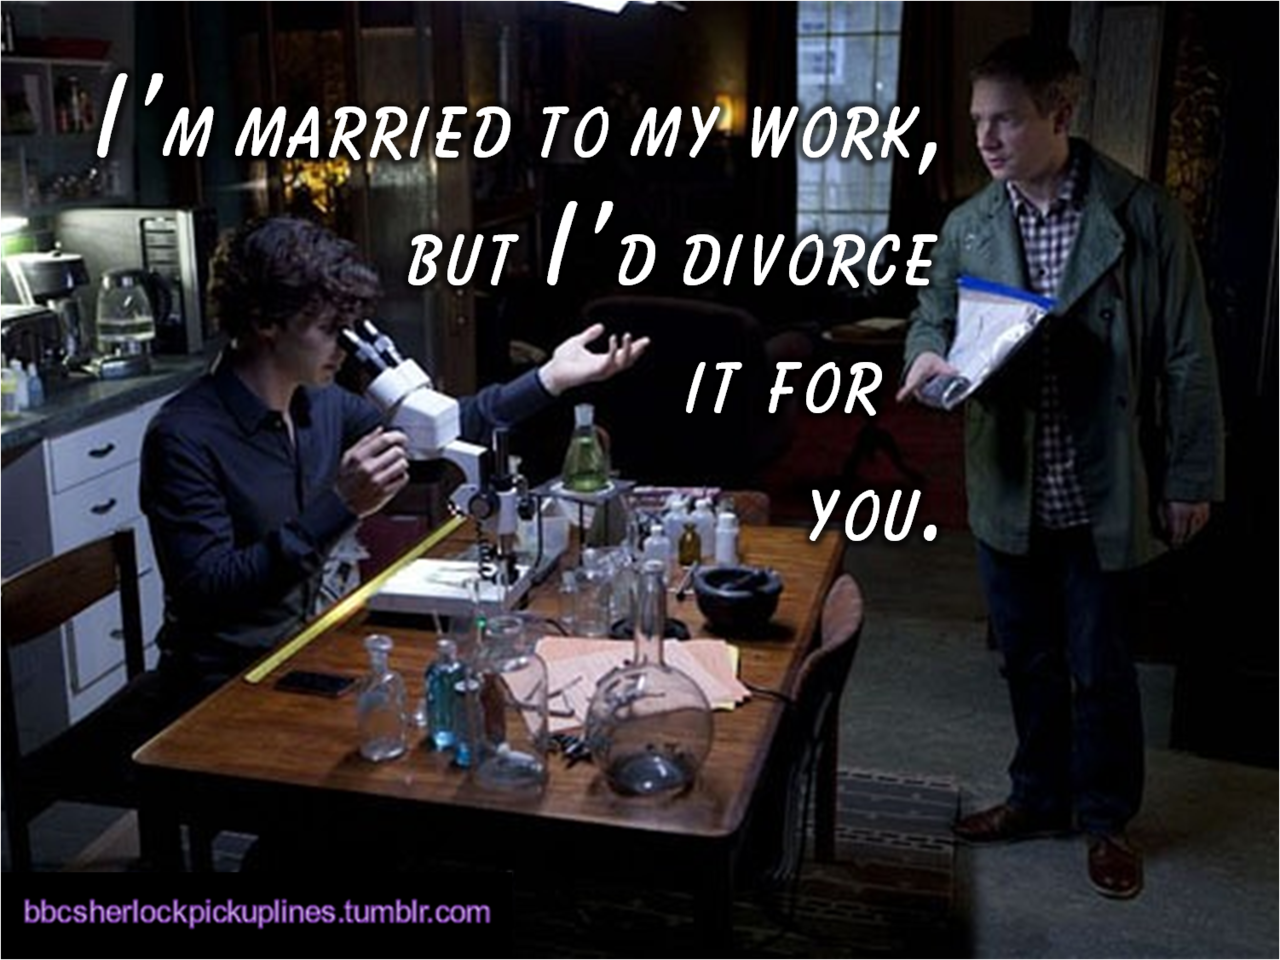 &ldquo;I&rsquo;m married to my work, but I&rsquo;d divorce it for you.&rdquo;